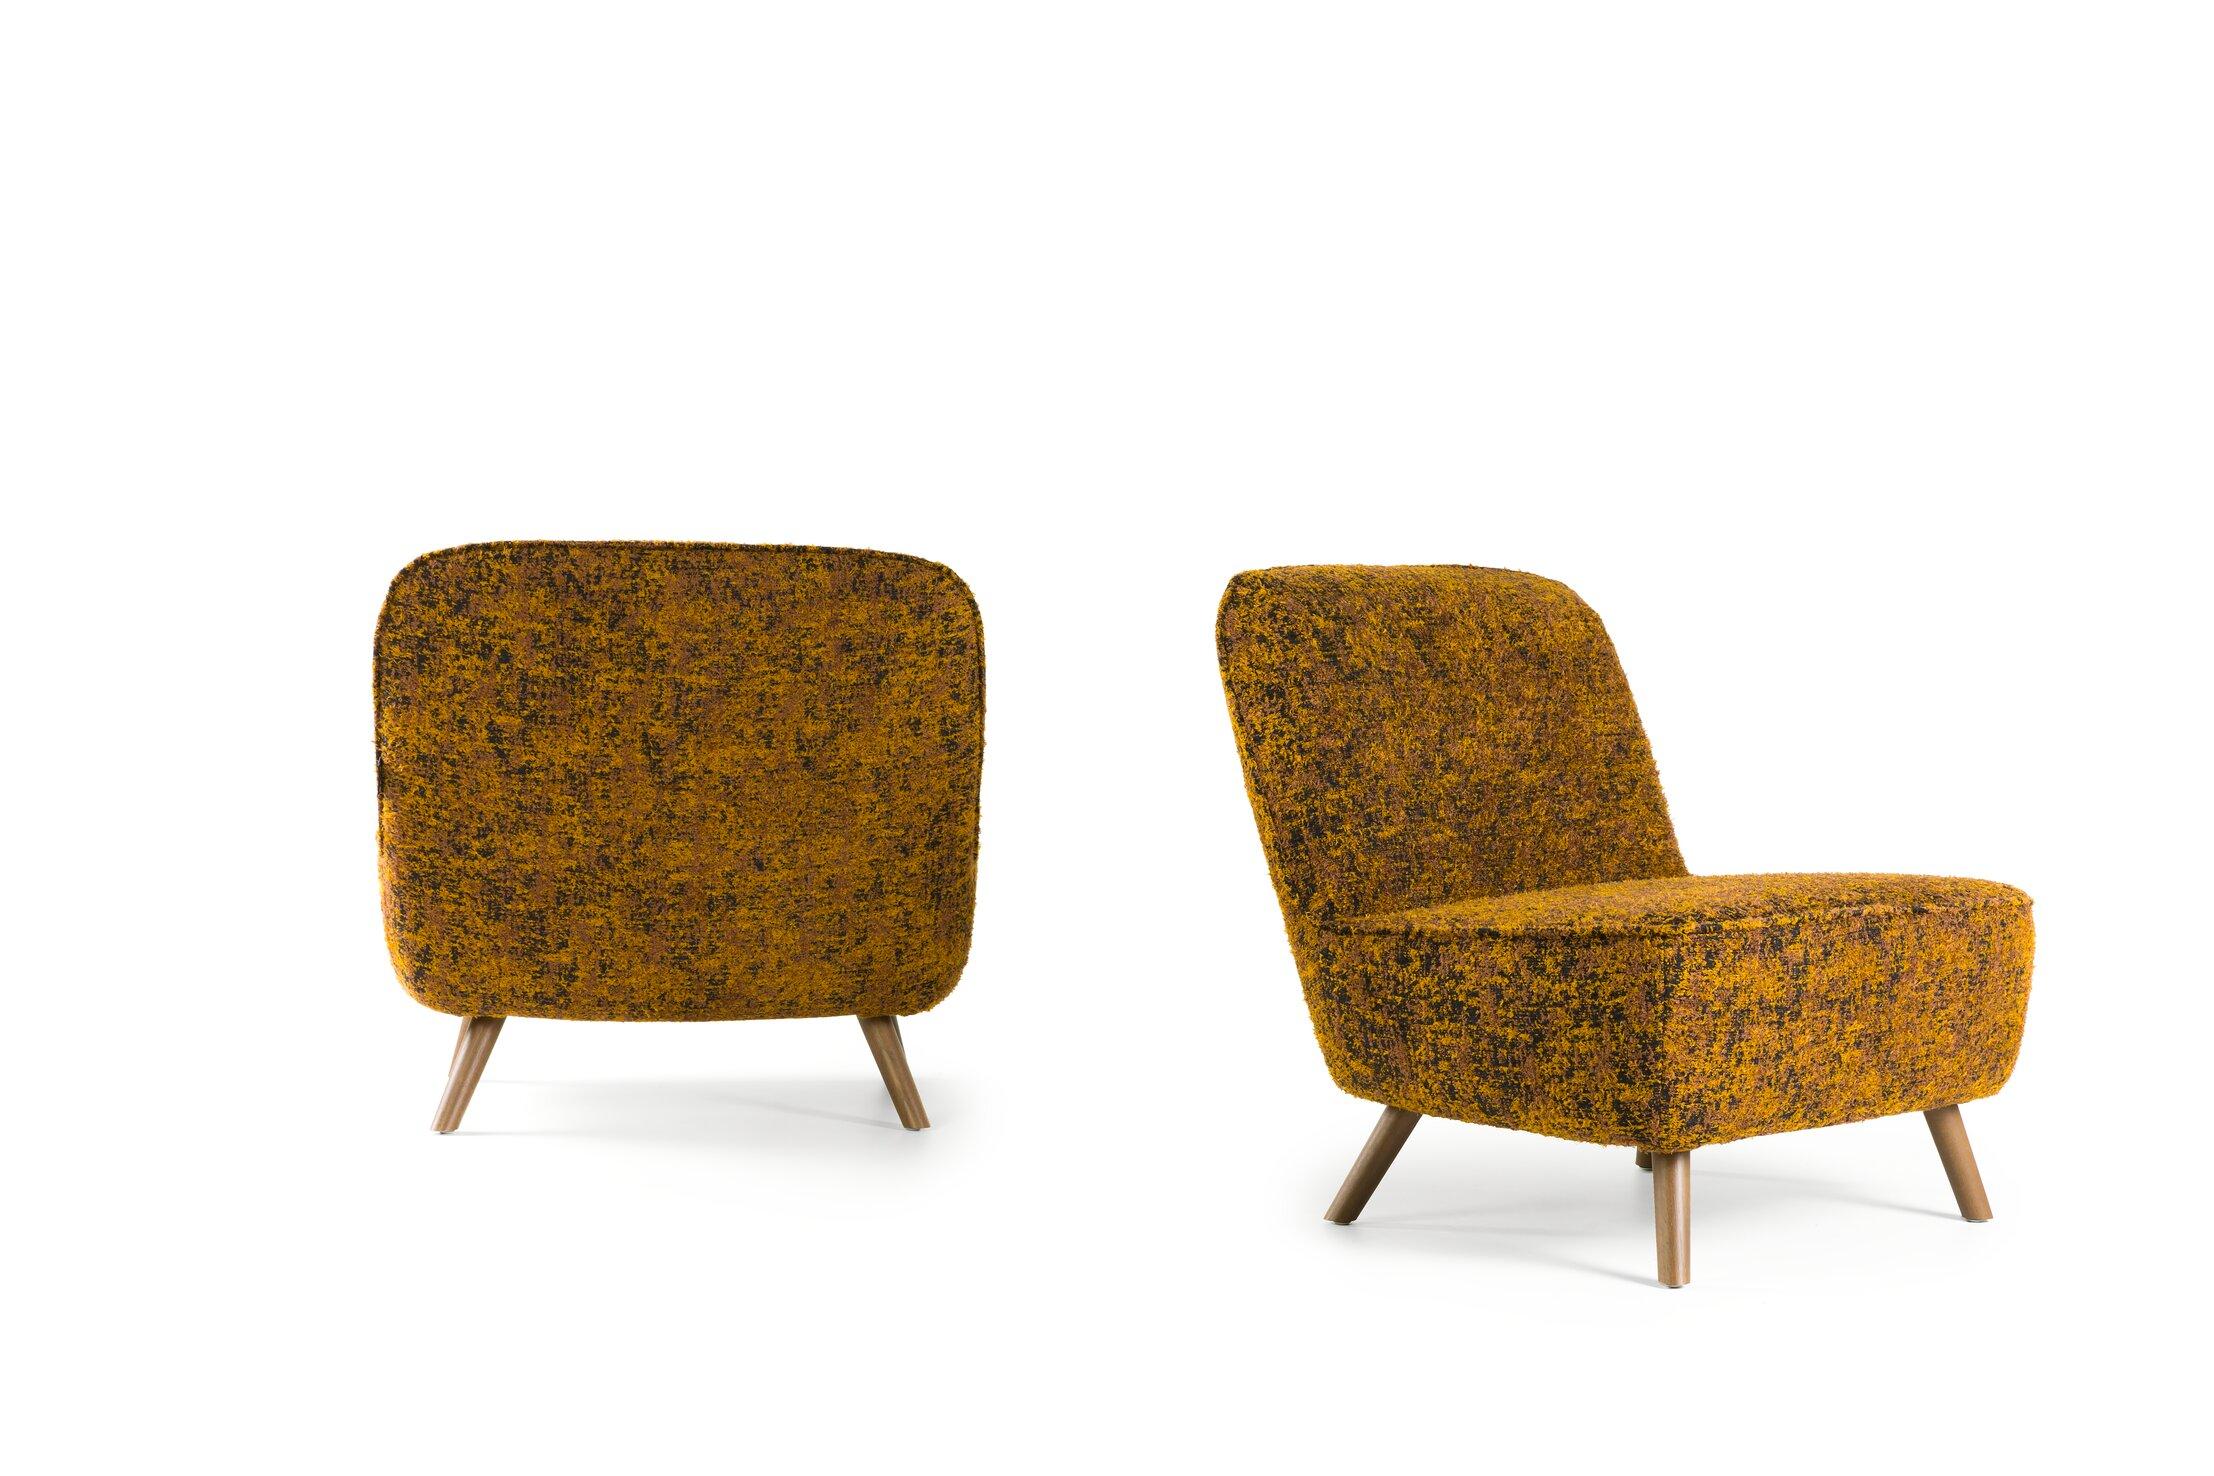 Dutch Moooi Cocktail Chair in Jacquard Mustard Upholstery with White Wash Stained Legs